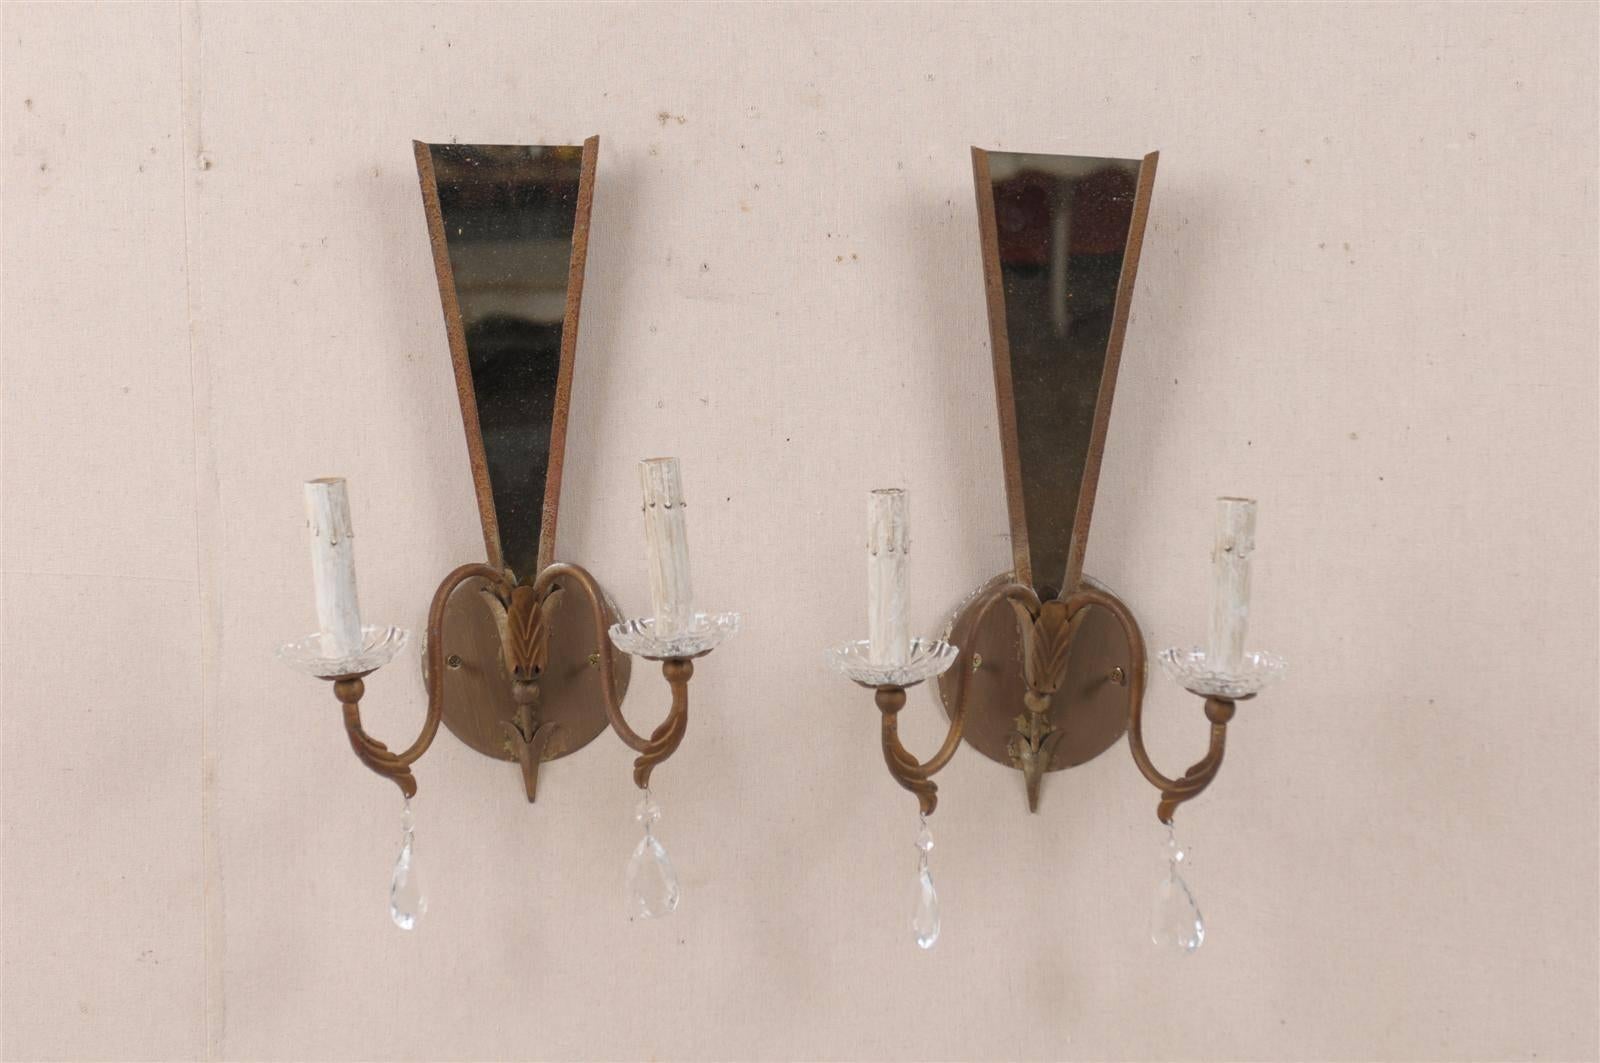 A pair of vintage modern French mirror backed sconces with crystal accents. This pair of mid-20th century French sconces features a triangular mirrored backplate supporting two swoop arms. Two delicate crystals and acanthus leaf motifs decorate the